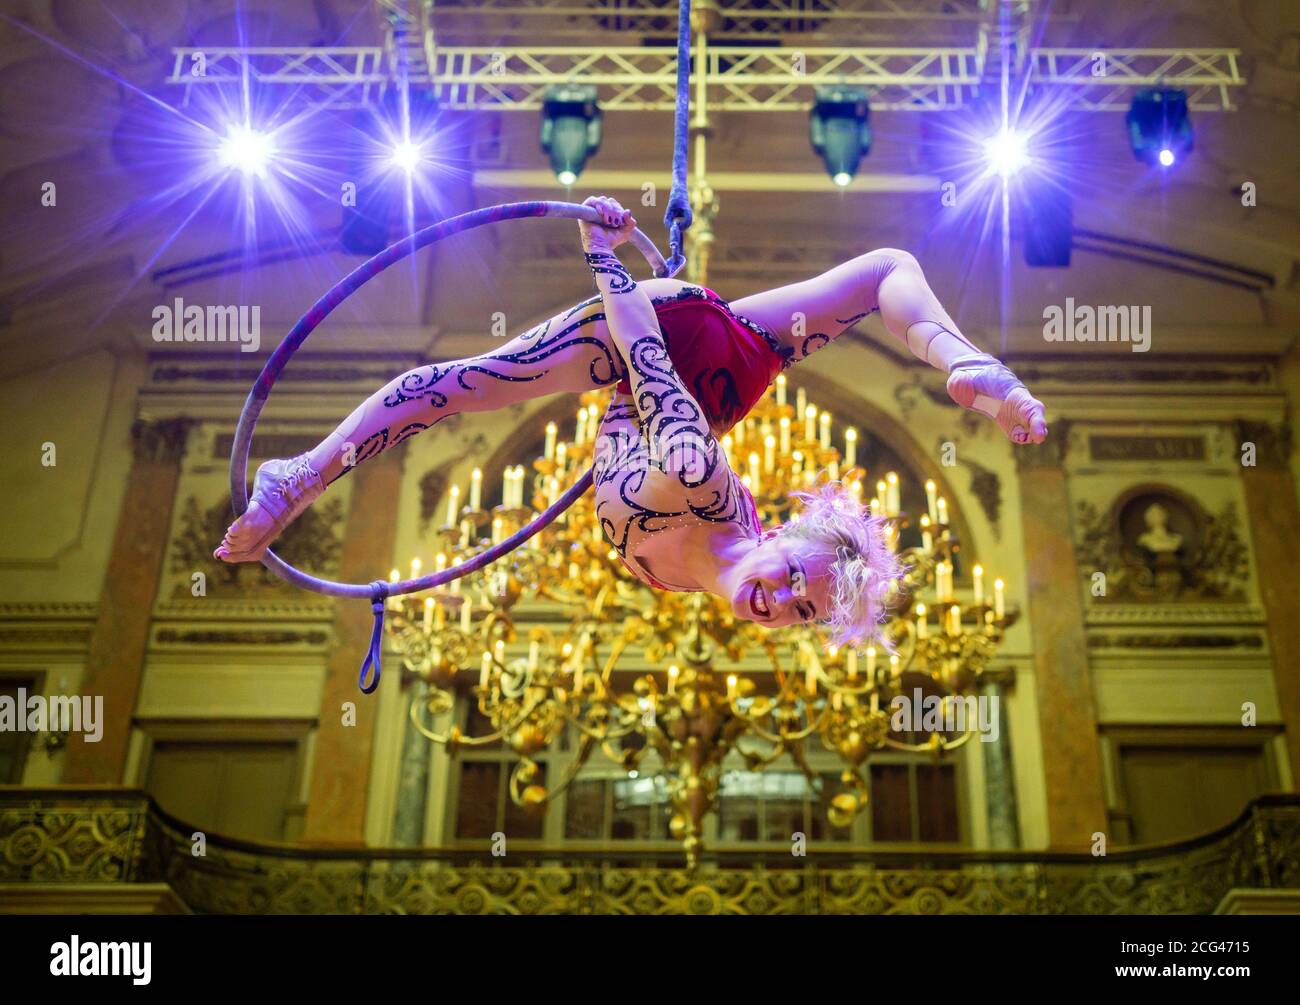 Frankfurt, Germany. 9th Sep 2020.  The artist Alyona Pavlova demonstrates her skills in the Gesellschaftshaus of the Frankfurt Palmengarten in a ring hanging from the ceiling. At a press conference, the Tigerpalast Varieté Theater presented its plans for this year's international Christmas revue and the accompanying hygiene concept. The Christmas Variety Theatre is to be held from 20.11.20 to 17.01.21 for up to 250 people. Credit: dpa picture alliance/Alamy Live News Stock Photo